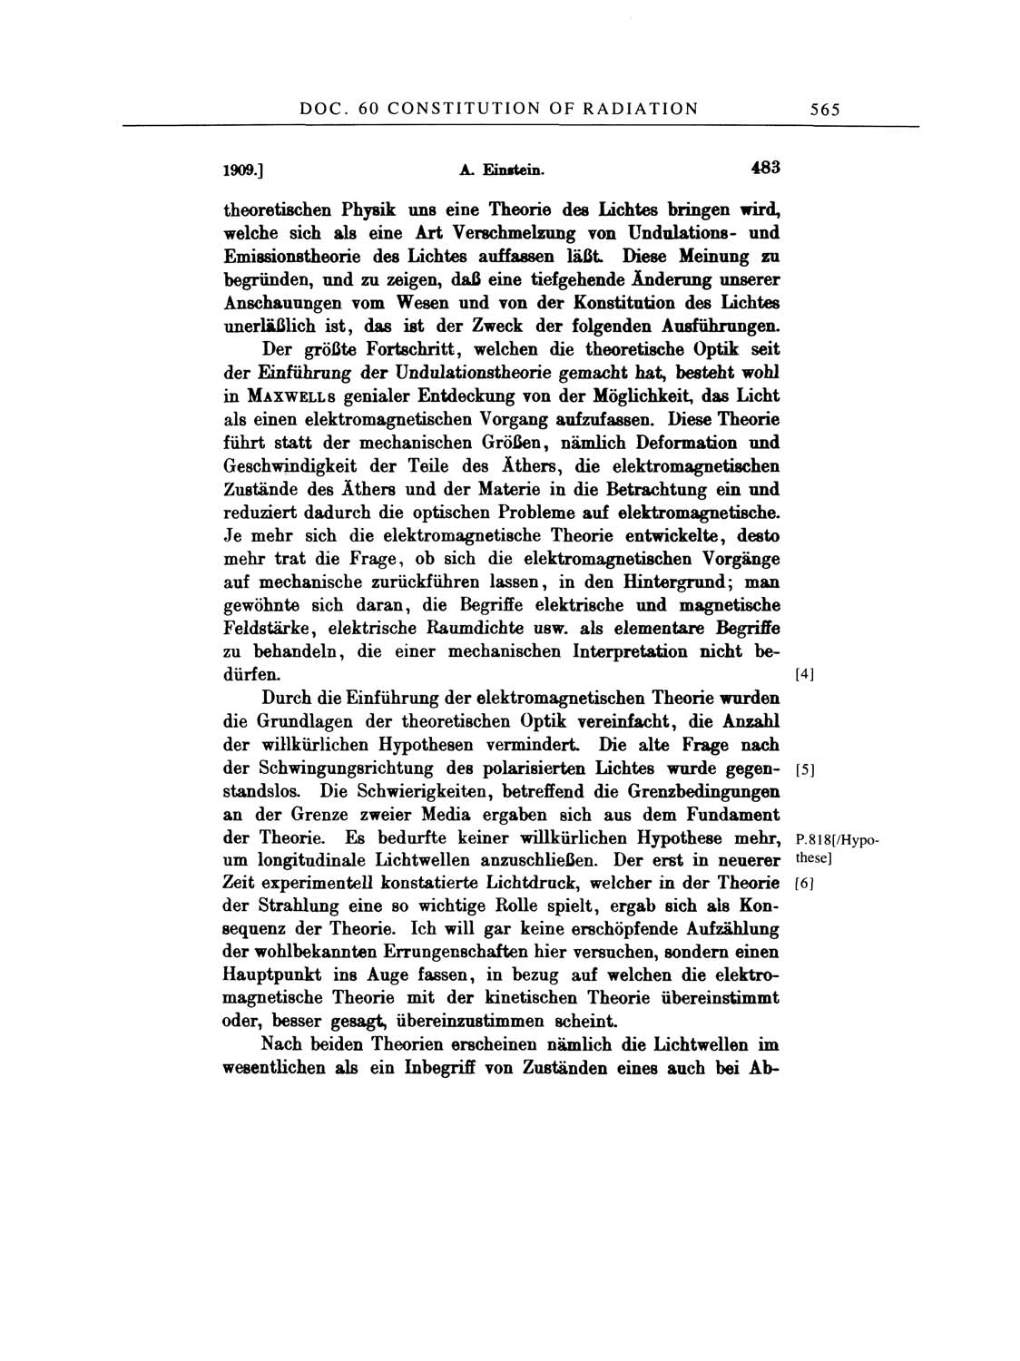 Volume 2: The Swiss Years: Writings, 1900-1909 page 565